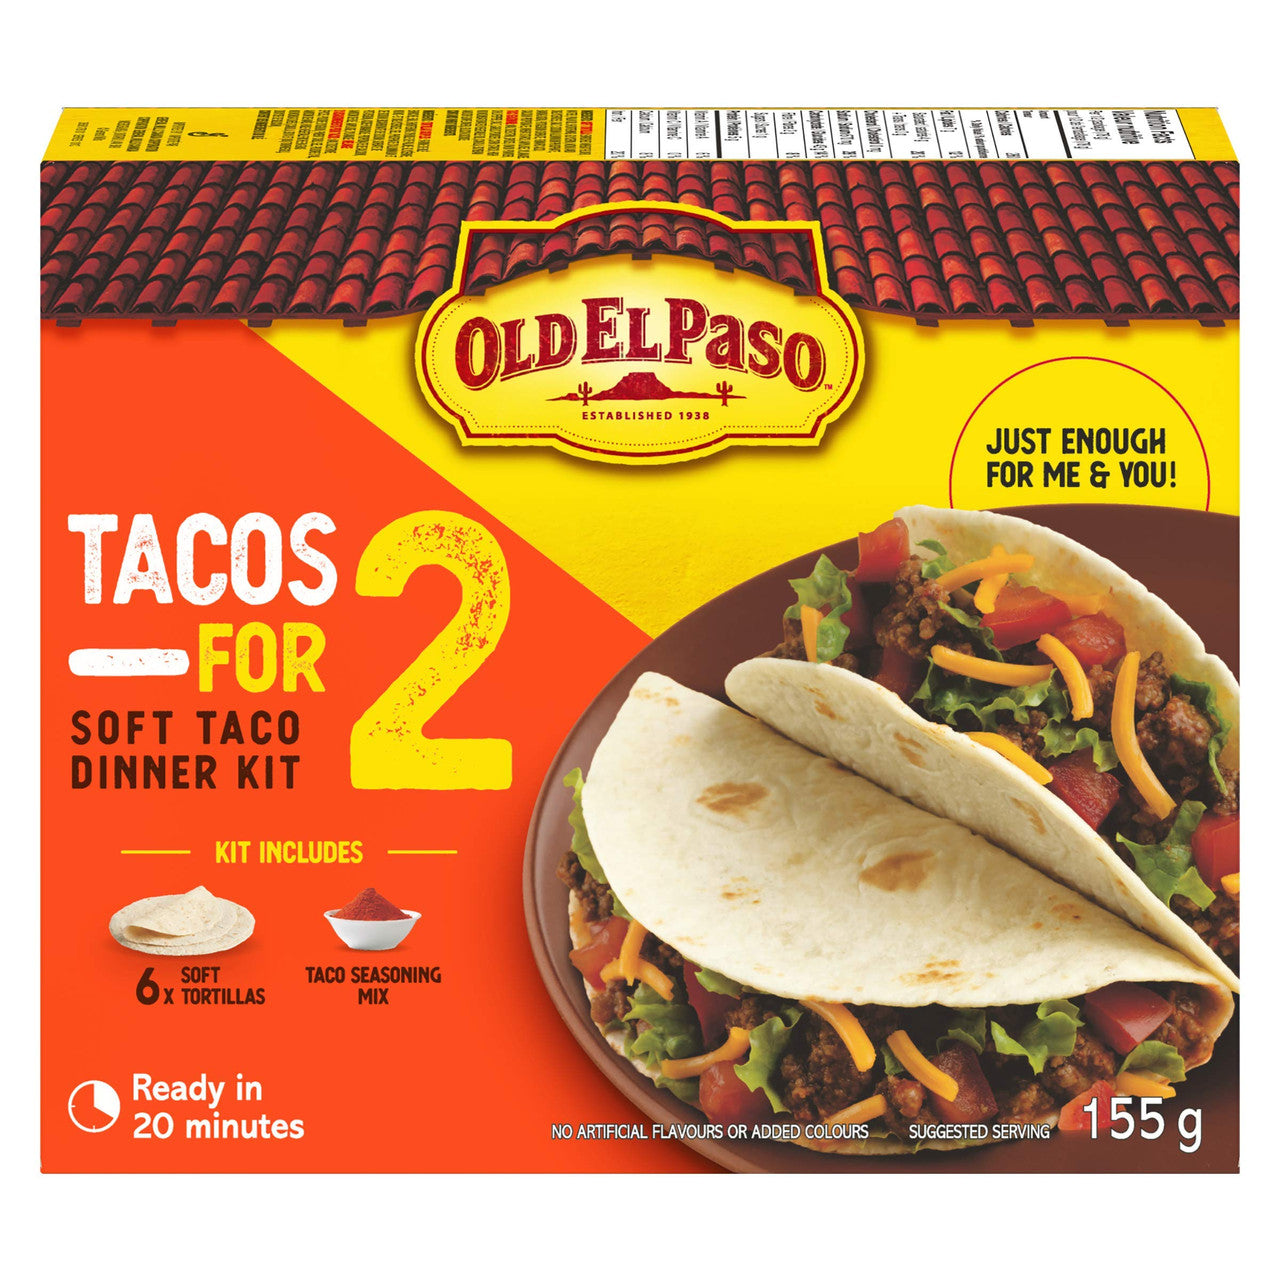 Old El Paso Tacos For Two Hard Taco Dinner Kit, 155g/5.5 oz., {Imported from Canada}